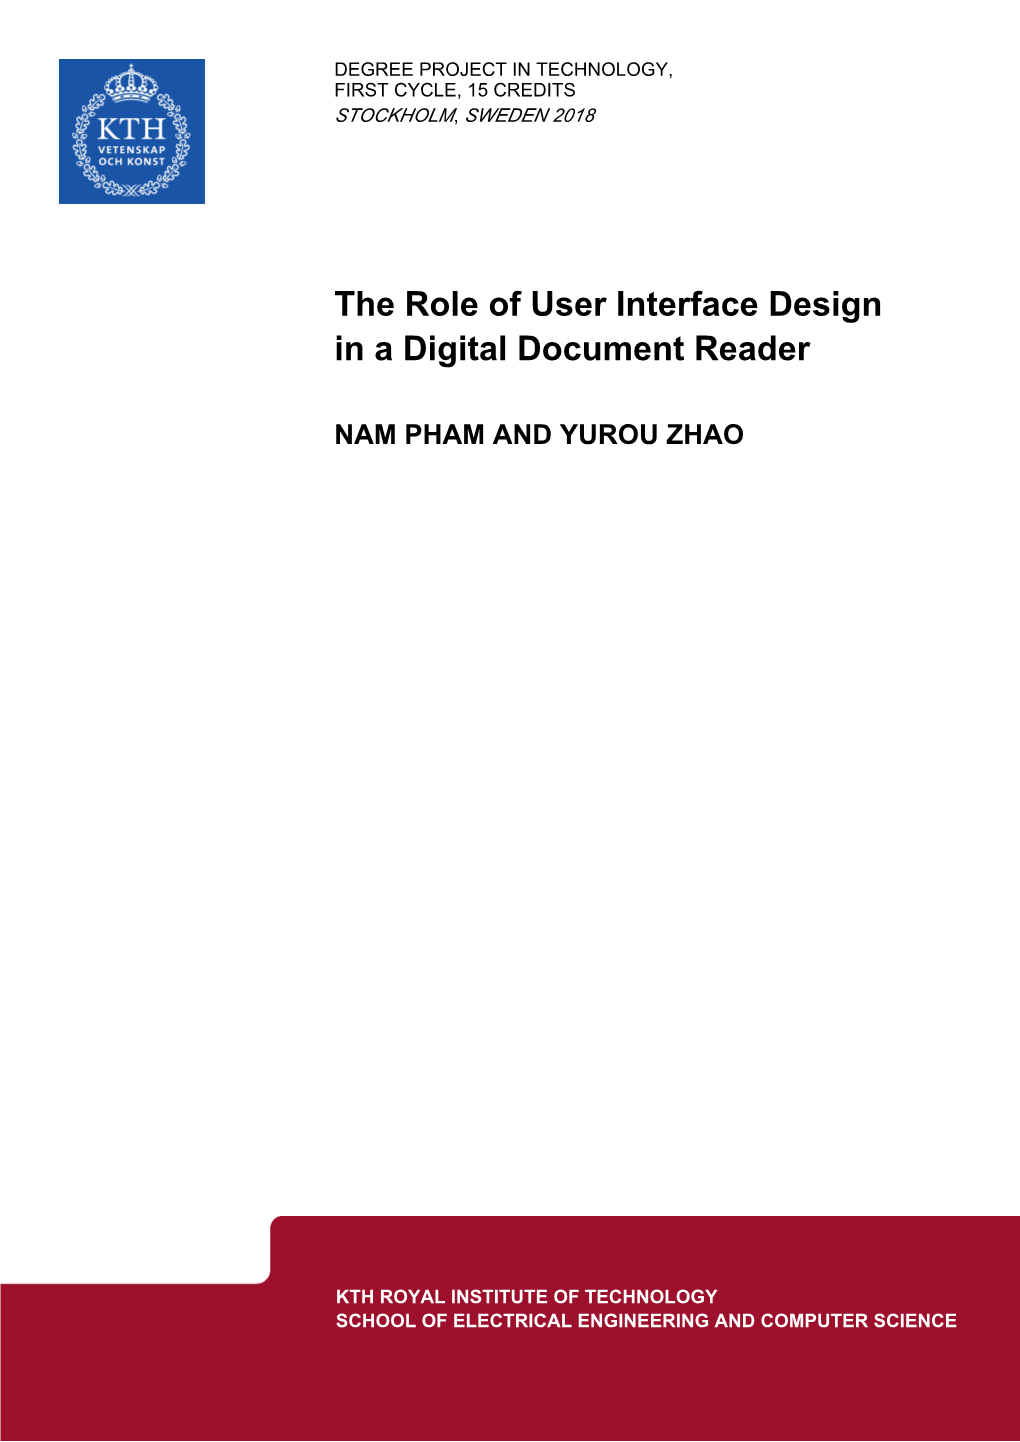 The Role of User Interface Design in a Digital Document Reader